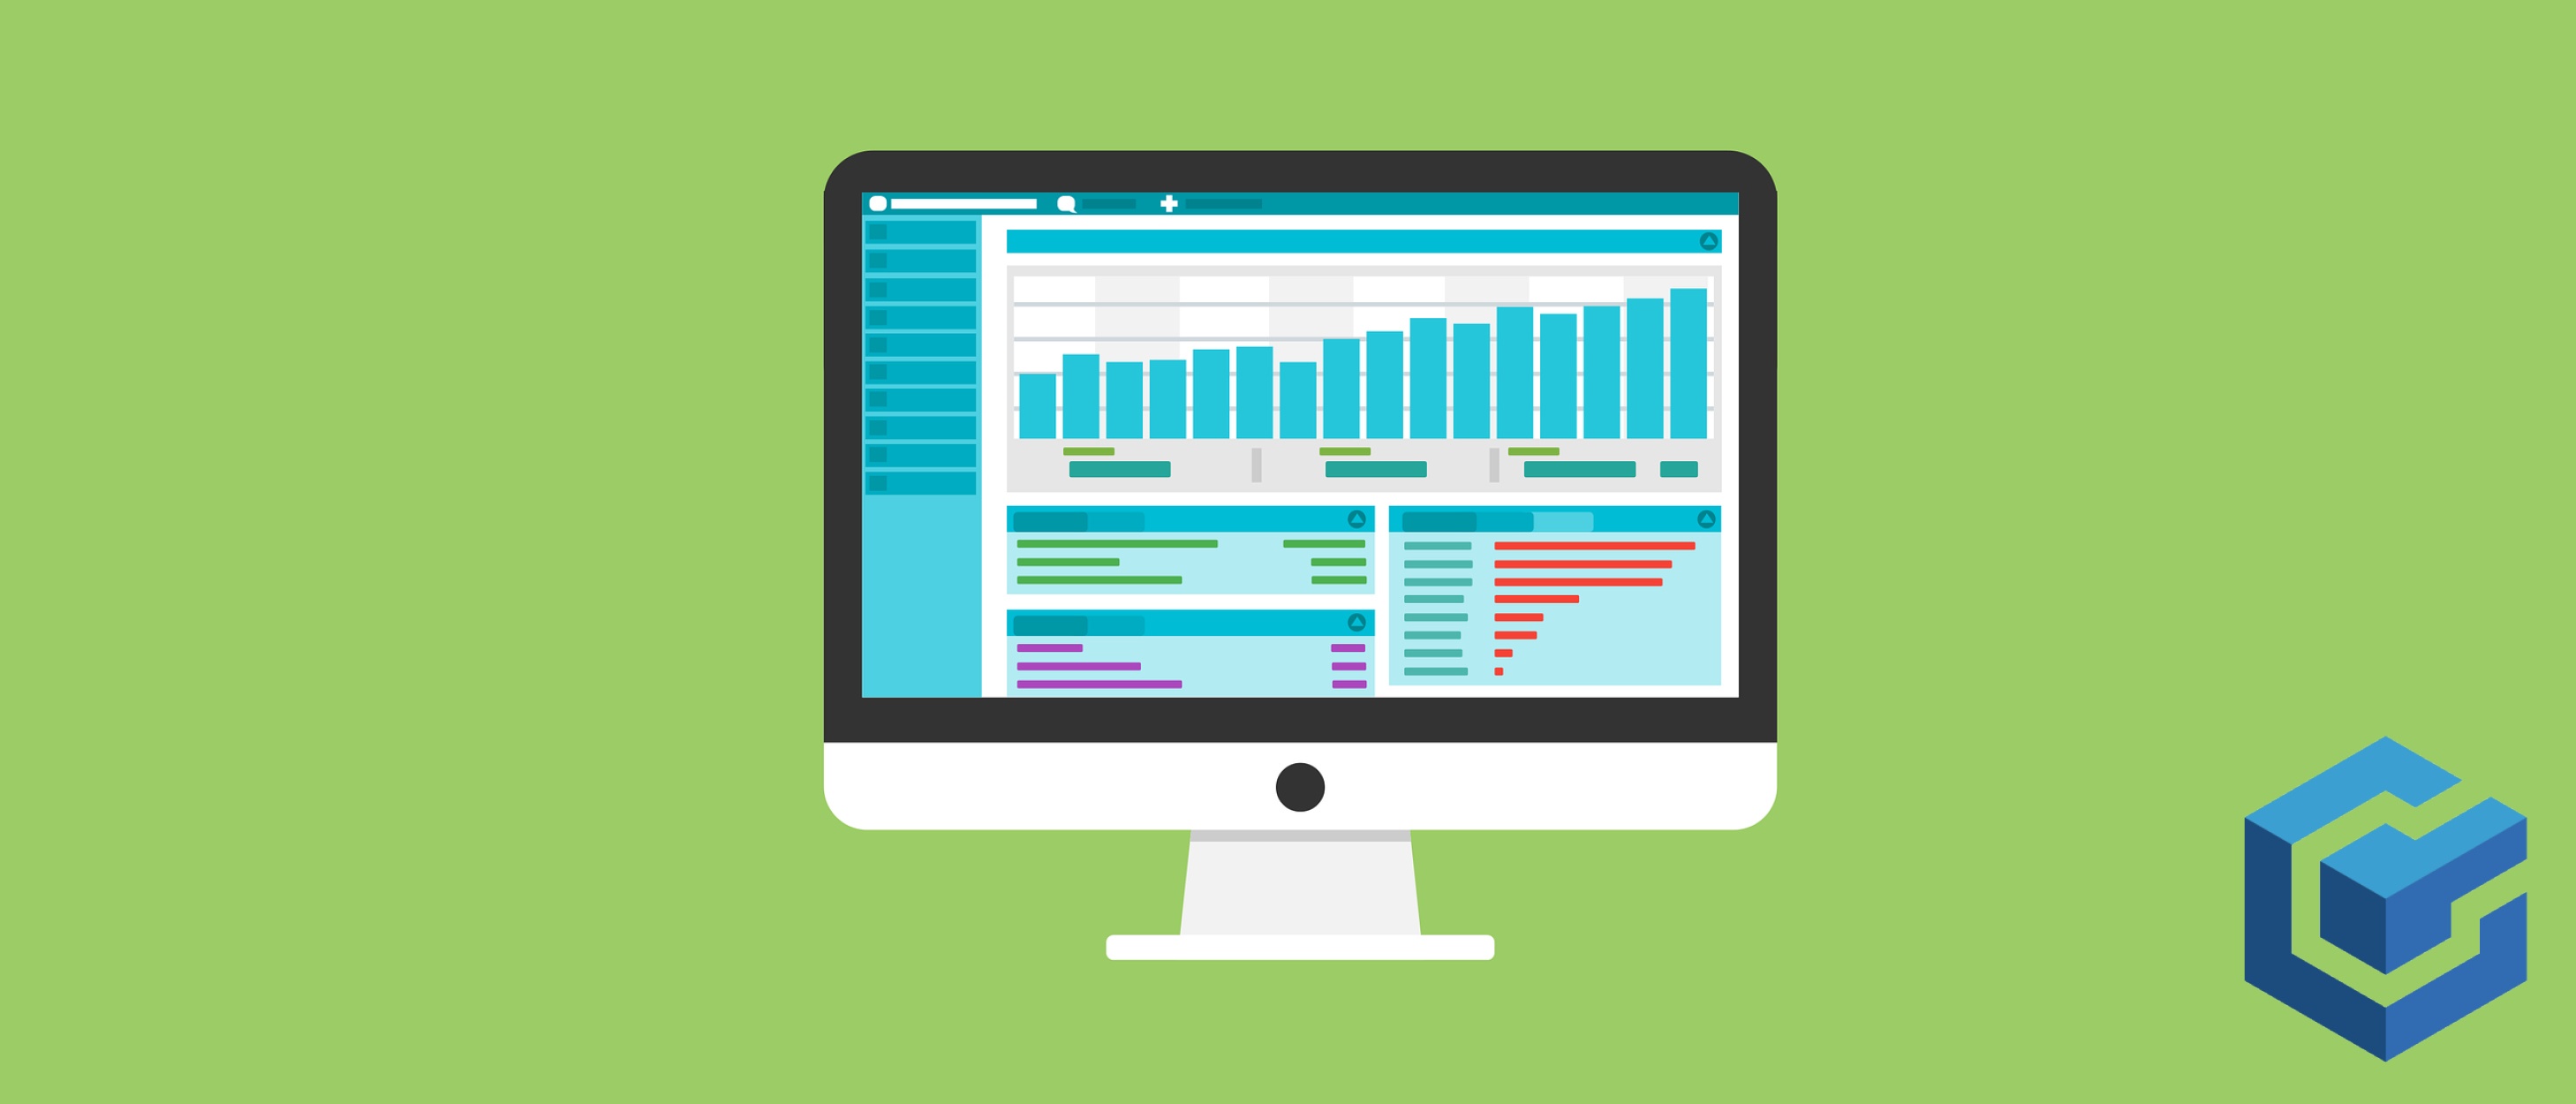 Use Data to Track Your Marketing Success